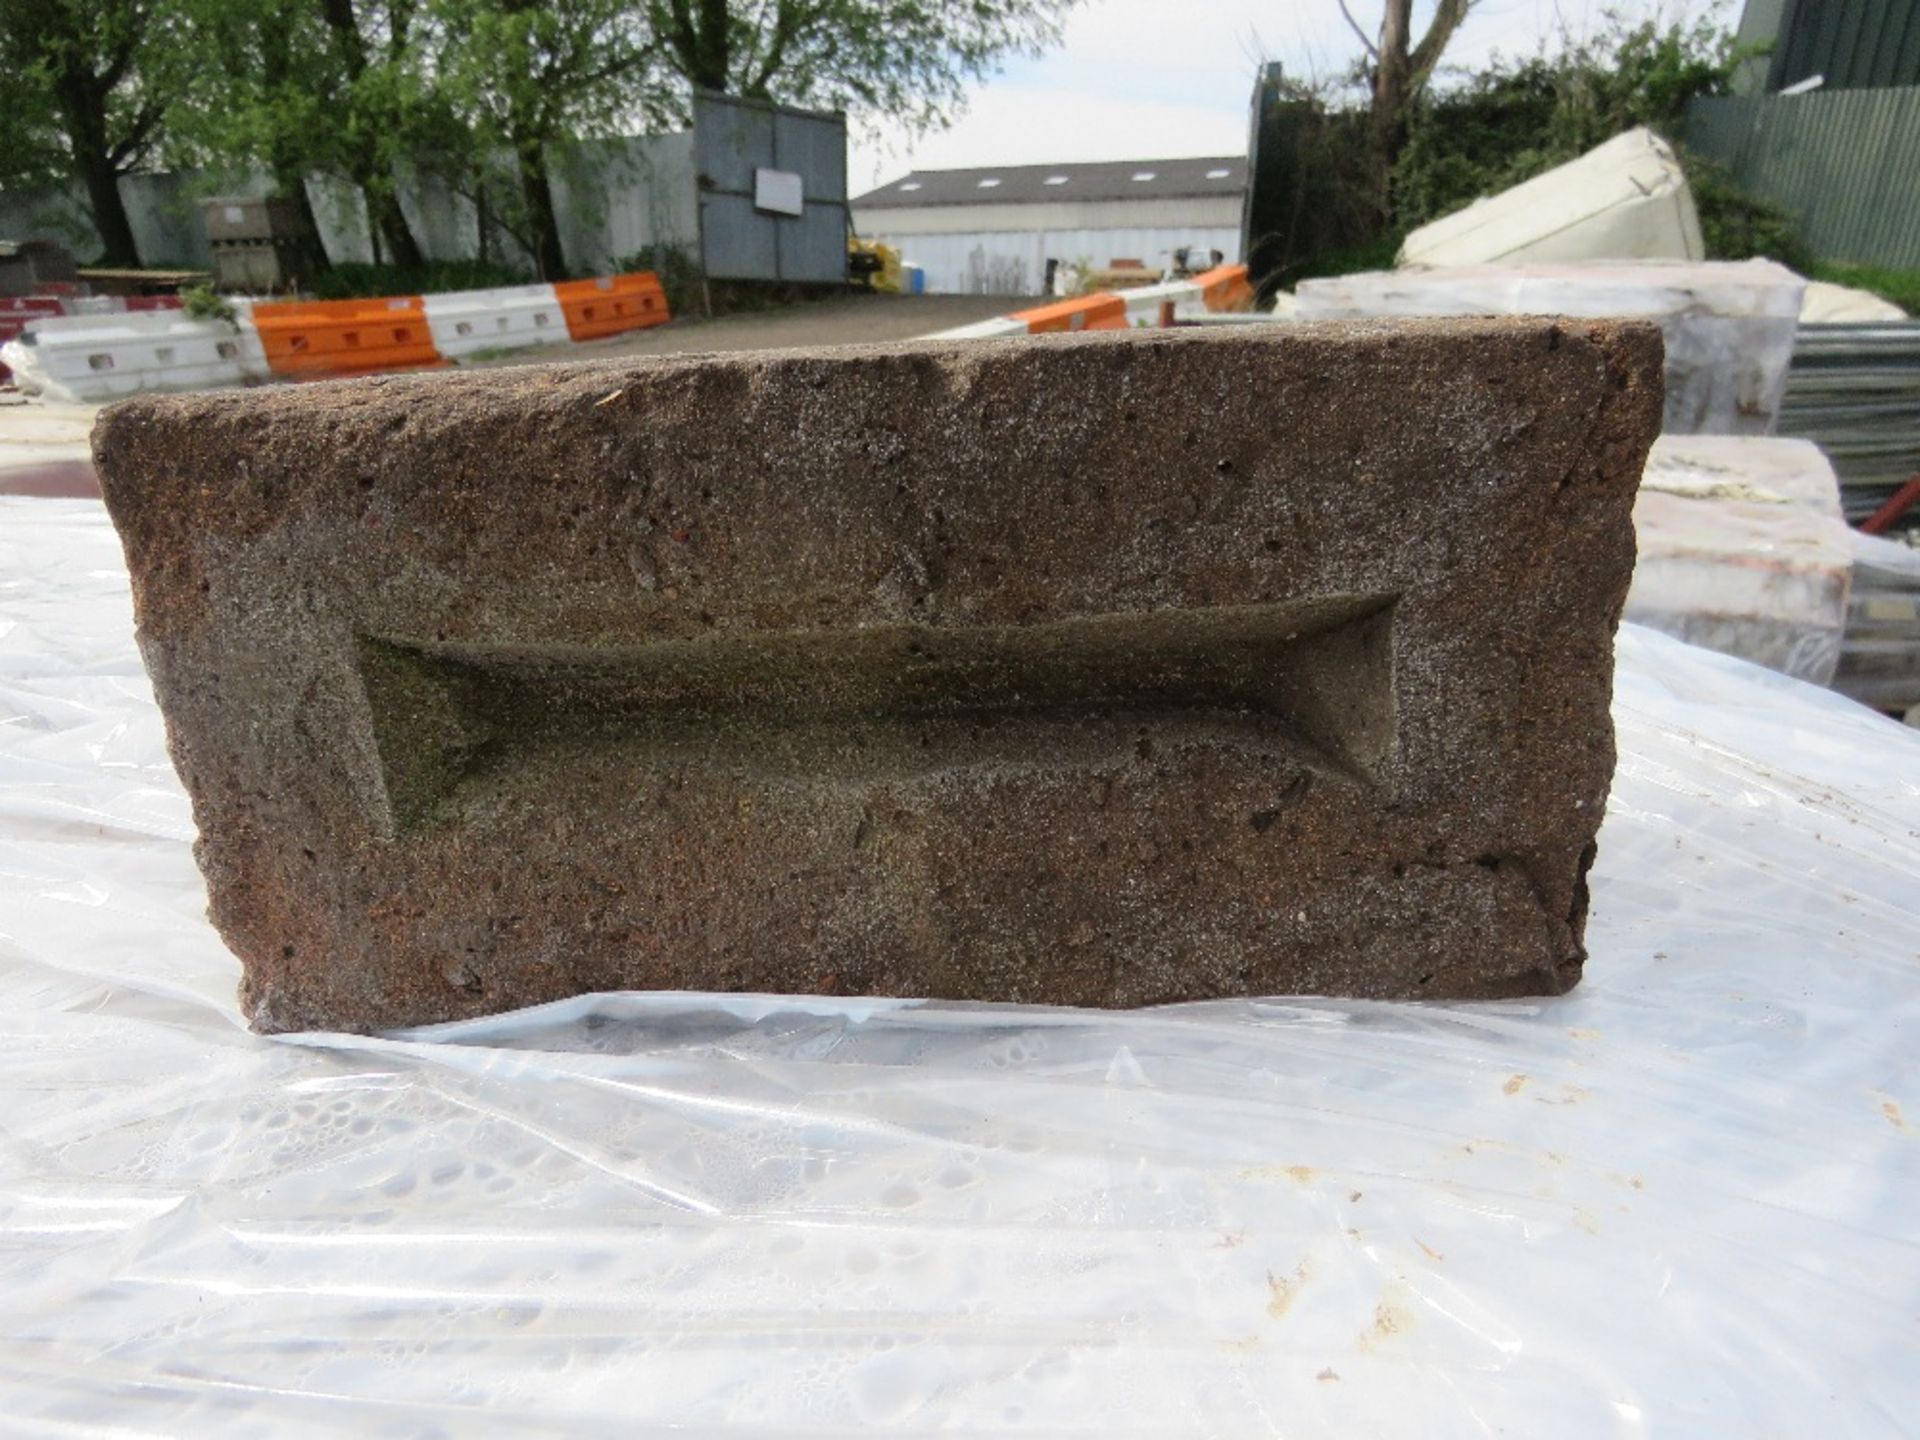 3 X PACKS OF RUSHINGTON ANTIQUE (DALI) BRICKS, CODE T33. BELIEVED TO BE 730NO IN EACH PACK. THIS - Image 9 of 17